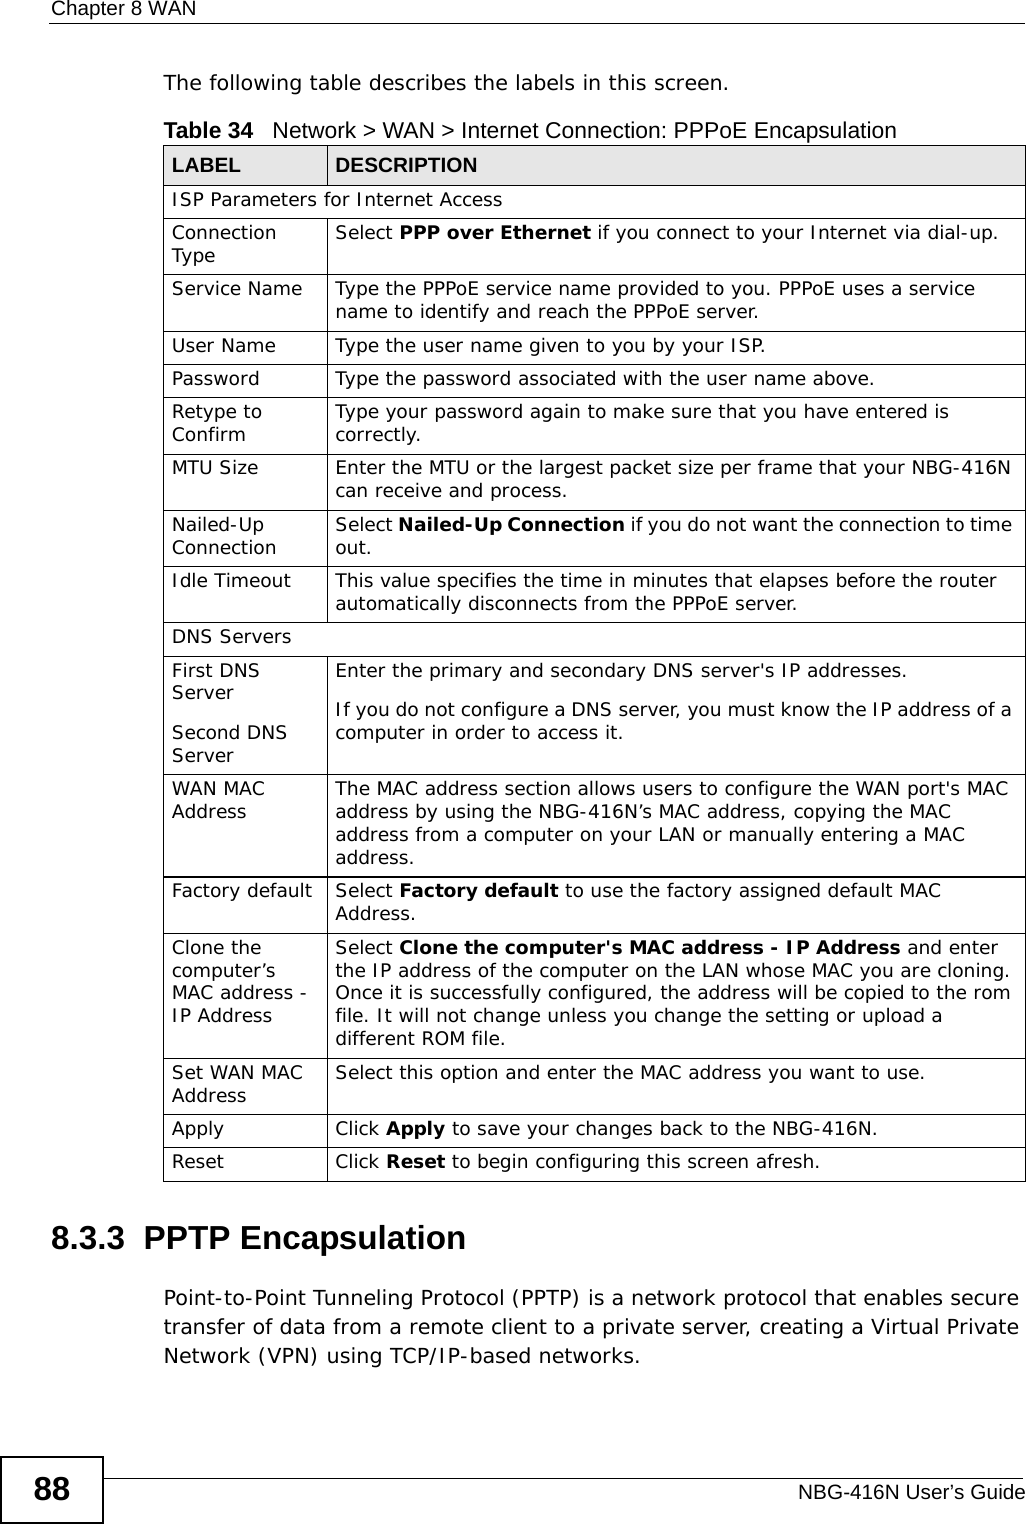 Chapter 8 WANNBG-416N User’s Guide88The following table describes the labels in this screen.8.3.3  PPTP EncapsulationPoint-to-Point Tunneling Protocol (PPTP) is a network protocol that enables secure transfer of data from a remote client to a private server, creating a Virtual Private Network (VPN) using TCP/IP-based networks.Table 34   Network &gt; WAN &gt; Internet Connection: PPPoE EncapsulationLABEL DESCRIPTIONISP Parameters for Internet AccessConnection Type Select PPP over Ethernet if you connect to your Internet via dial-up.Service Name Type the PPPoE service name provided to you. PPPoE uses a service name to identify and reach the PPPoE server.User Name Type the user name given to you by your ISP.Password Type the password associated with the user name above.Retype to Confirm Type your password again to make sure that you have entered is correctly. MTU Size Enter the MTU or the largest packet size per frame that your NBG-416N can receive and process.Nailed-Up Connection Select Nailed-Up Connection if you do not want the connection to time out.Idle Timeout This value specifies the time in minutes that elapses before the router automatically disconnects from the PPPoE server.DNS ServersFirst DNS ServerSecond DNS Server Enter the primary and secondary DNS server&apos;s IP addresses.If you do not configure a DNS server, you must know the IP address of a computer in order to access it.WAN MAC Address The MAC address section allows users to configure the WAN port&apos;s MAC address by using the NBG-416N’s MAC address, copying the MAC address from a computer on your LAN or manually entering a MAC address. Factory default Select Factory default to use the factory assigned default MAC Address.Clone the computer’s MAC address - IP AddressSelect Clone the computer&apos;s MAC address - IP Address and enter the IP address of the computer on the LAN whose MAC you are cloning. Once it is successfully configured, the address will be copied to the rom file. It will not change unless you change the setting or upload a different ROM file. Set WAN MAC Address Select this option and enter the MAC address you want to use.Apply Click Apply to save your changes back to the NBG-416N.Reset Click Reset to begin configuring this screen afresh.